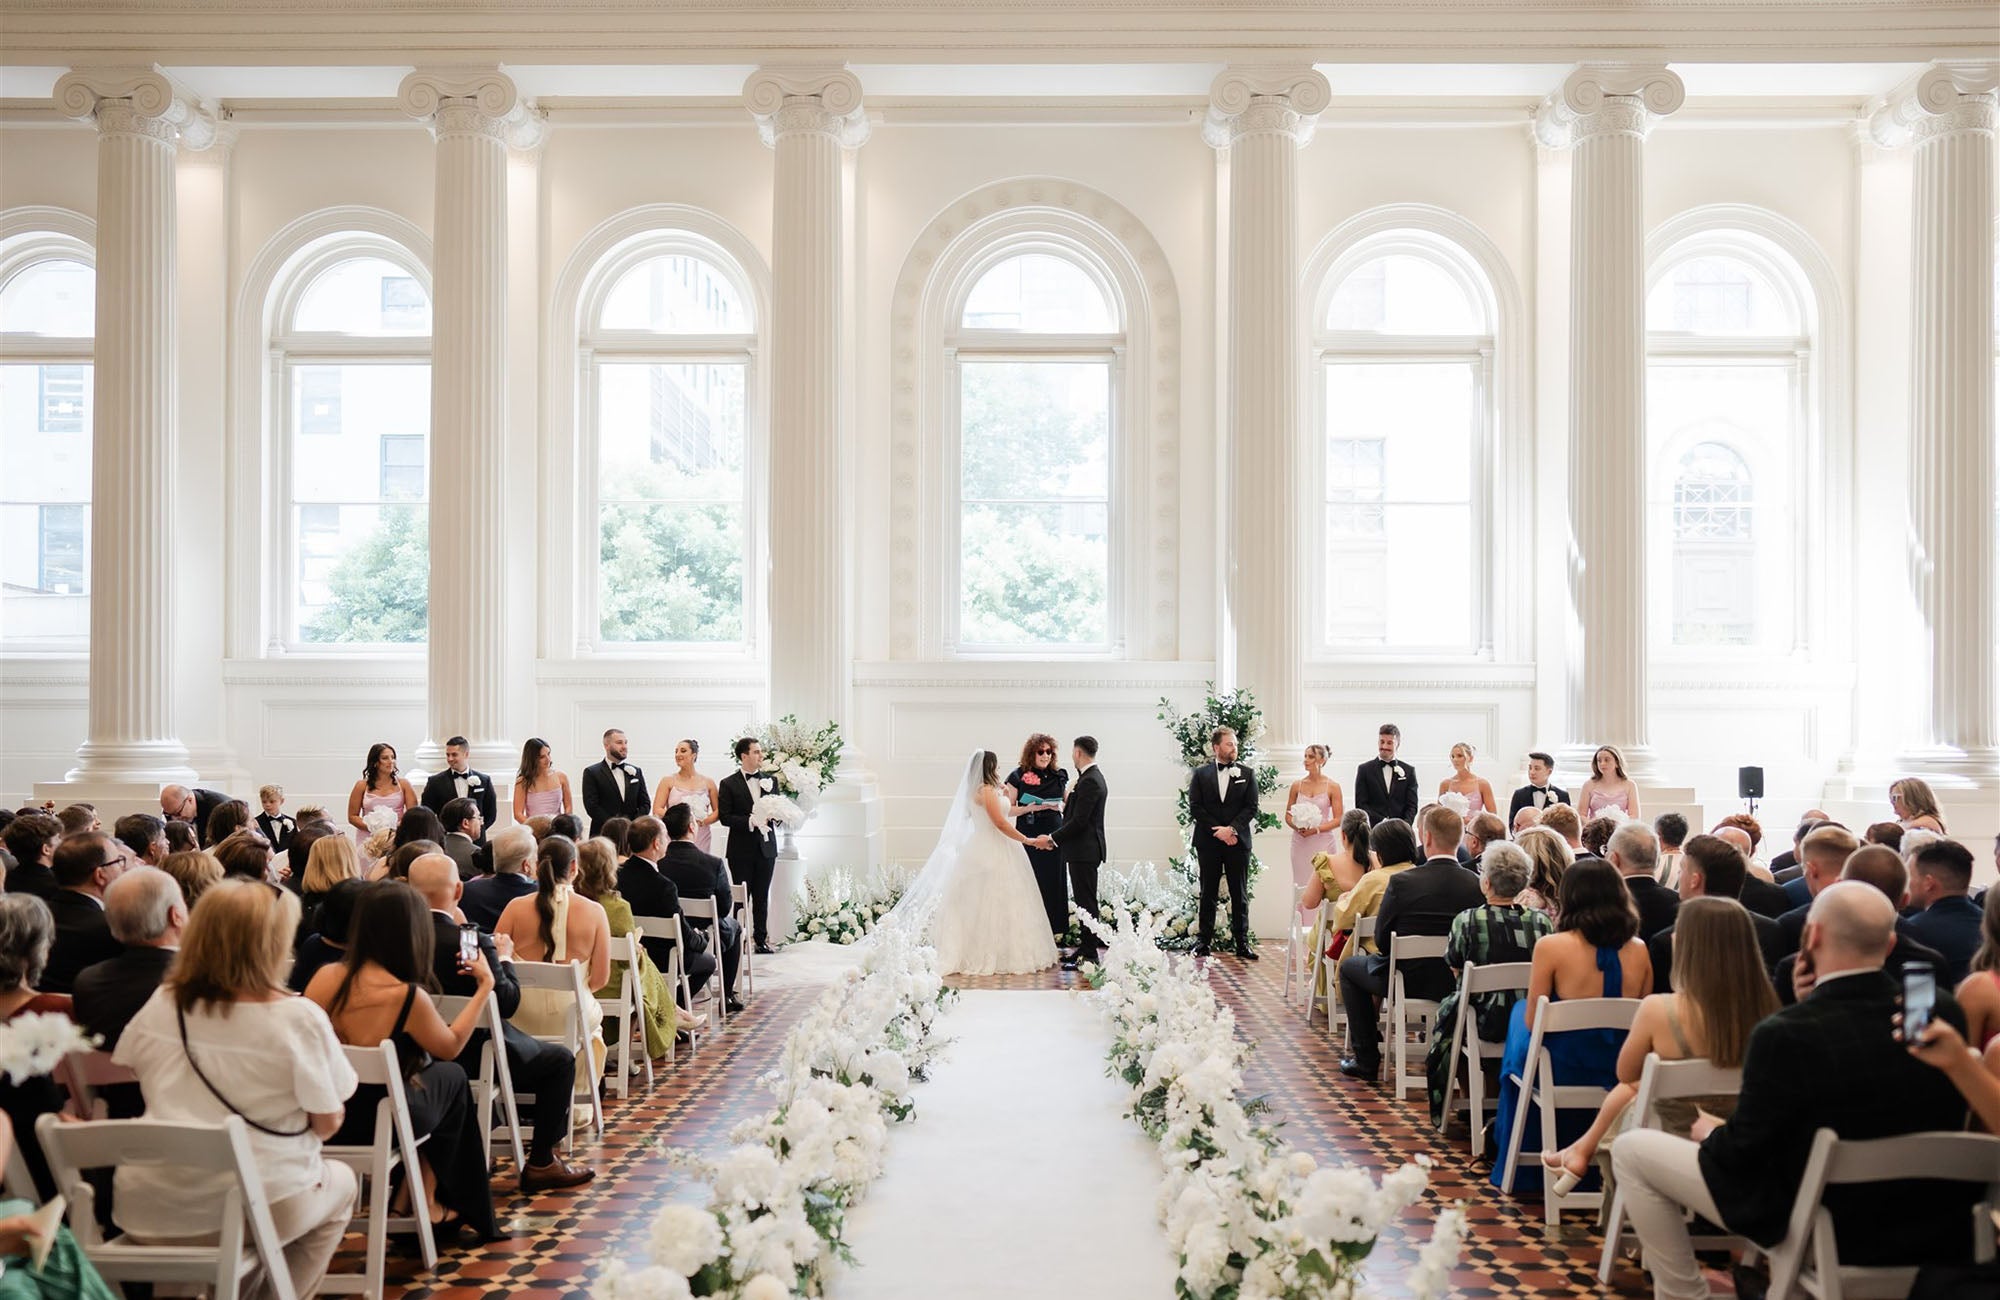 Wedding ceremony filled with white wedding flowers